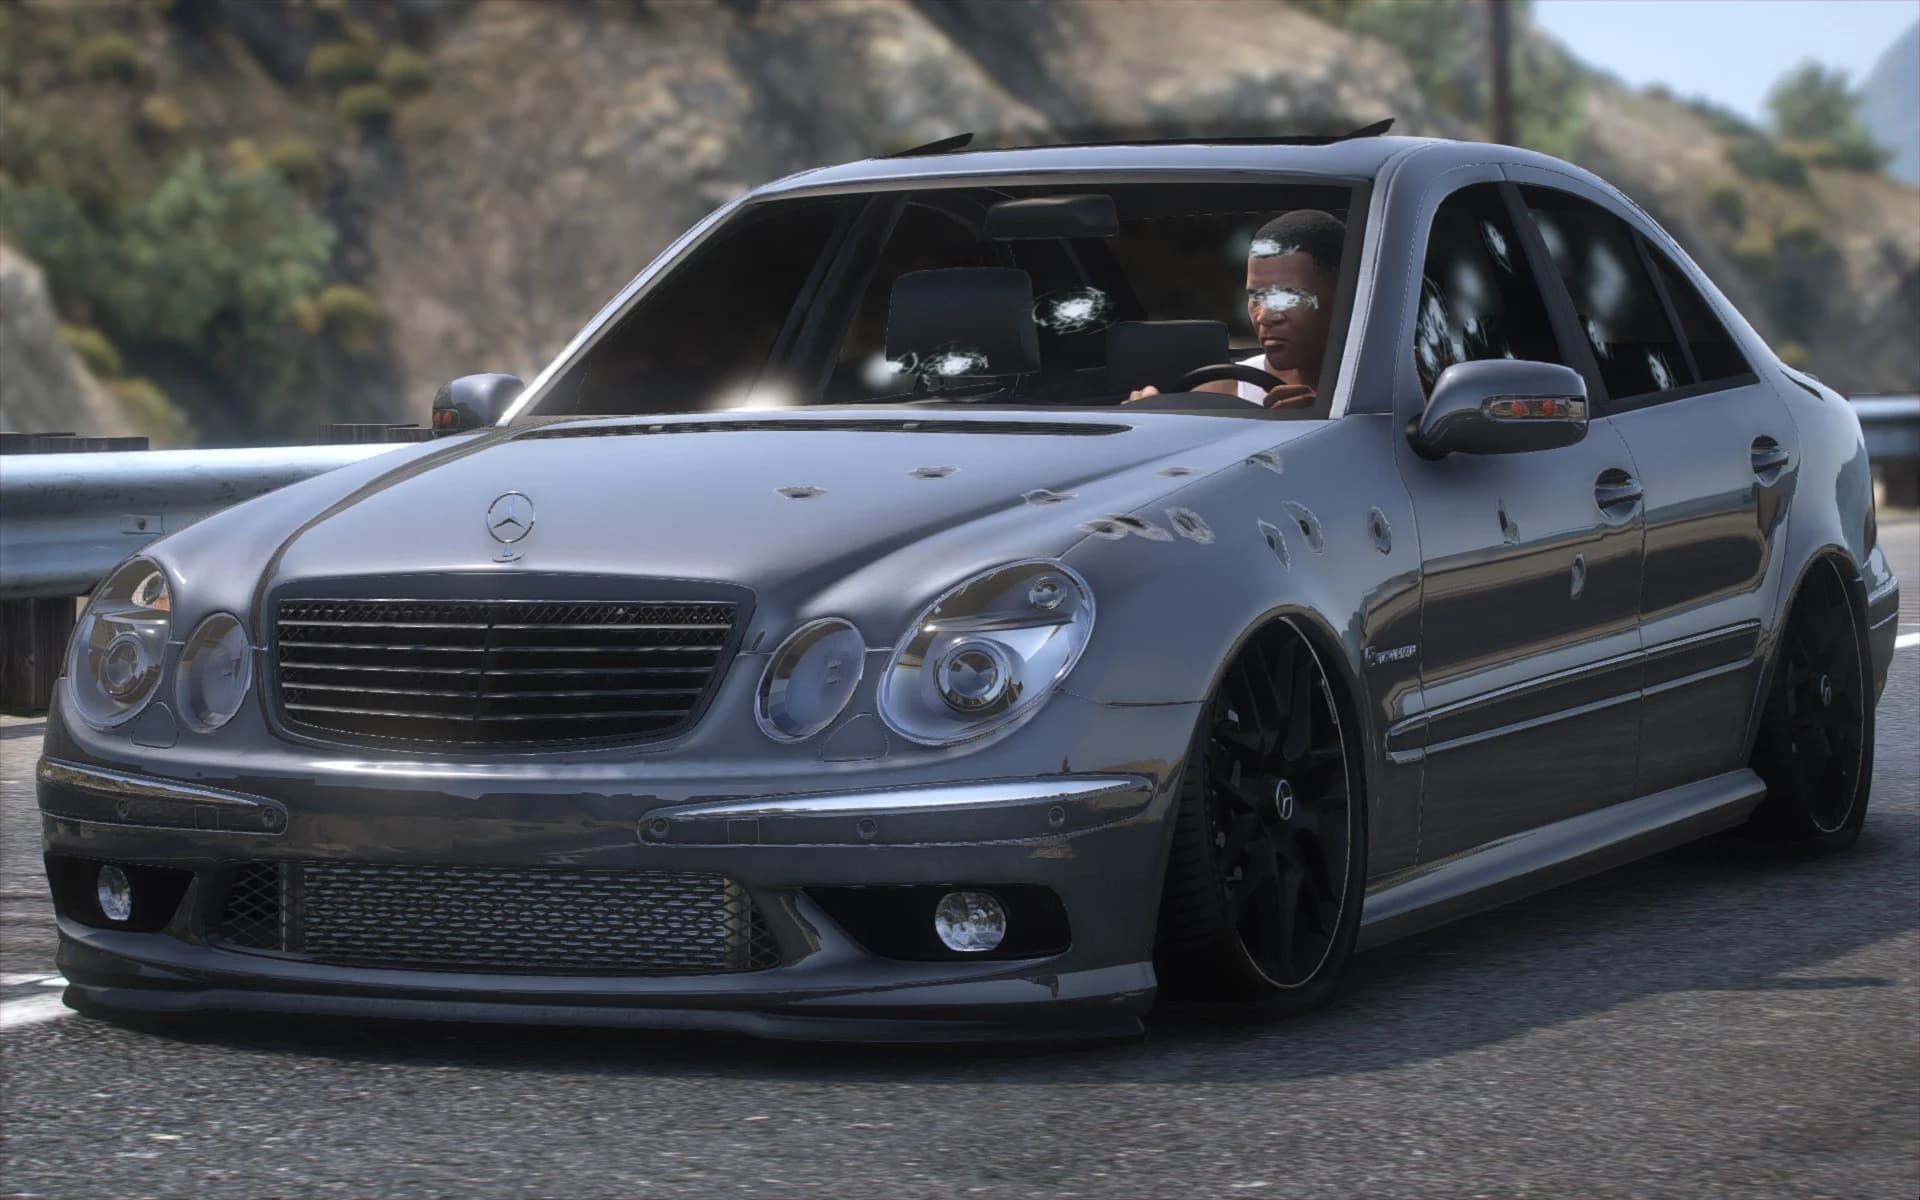 Mercedes-Benz E55 AMG (W211) [Add-On / Replace / FiveM, Tuning